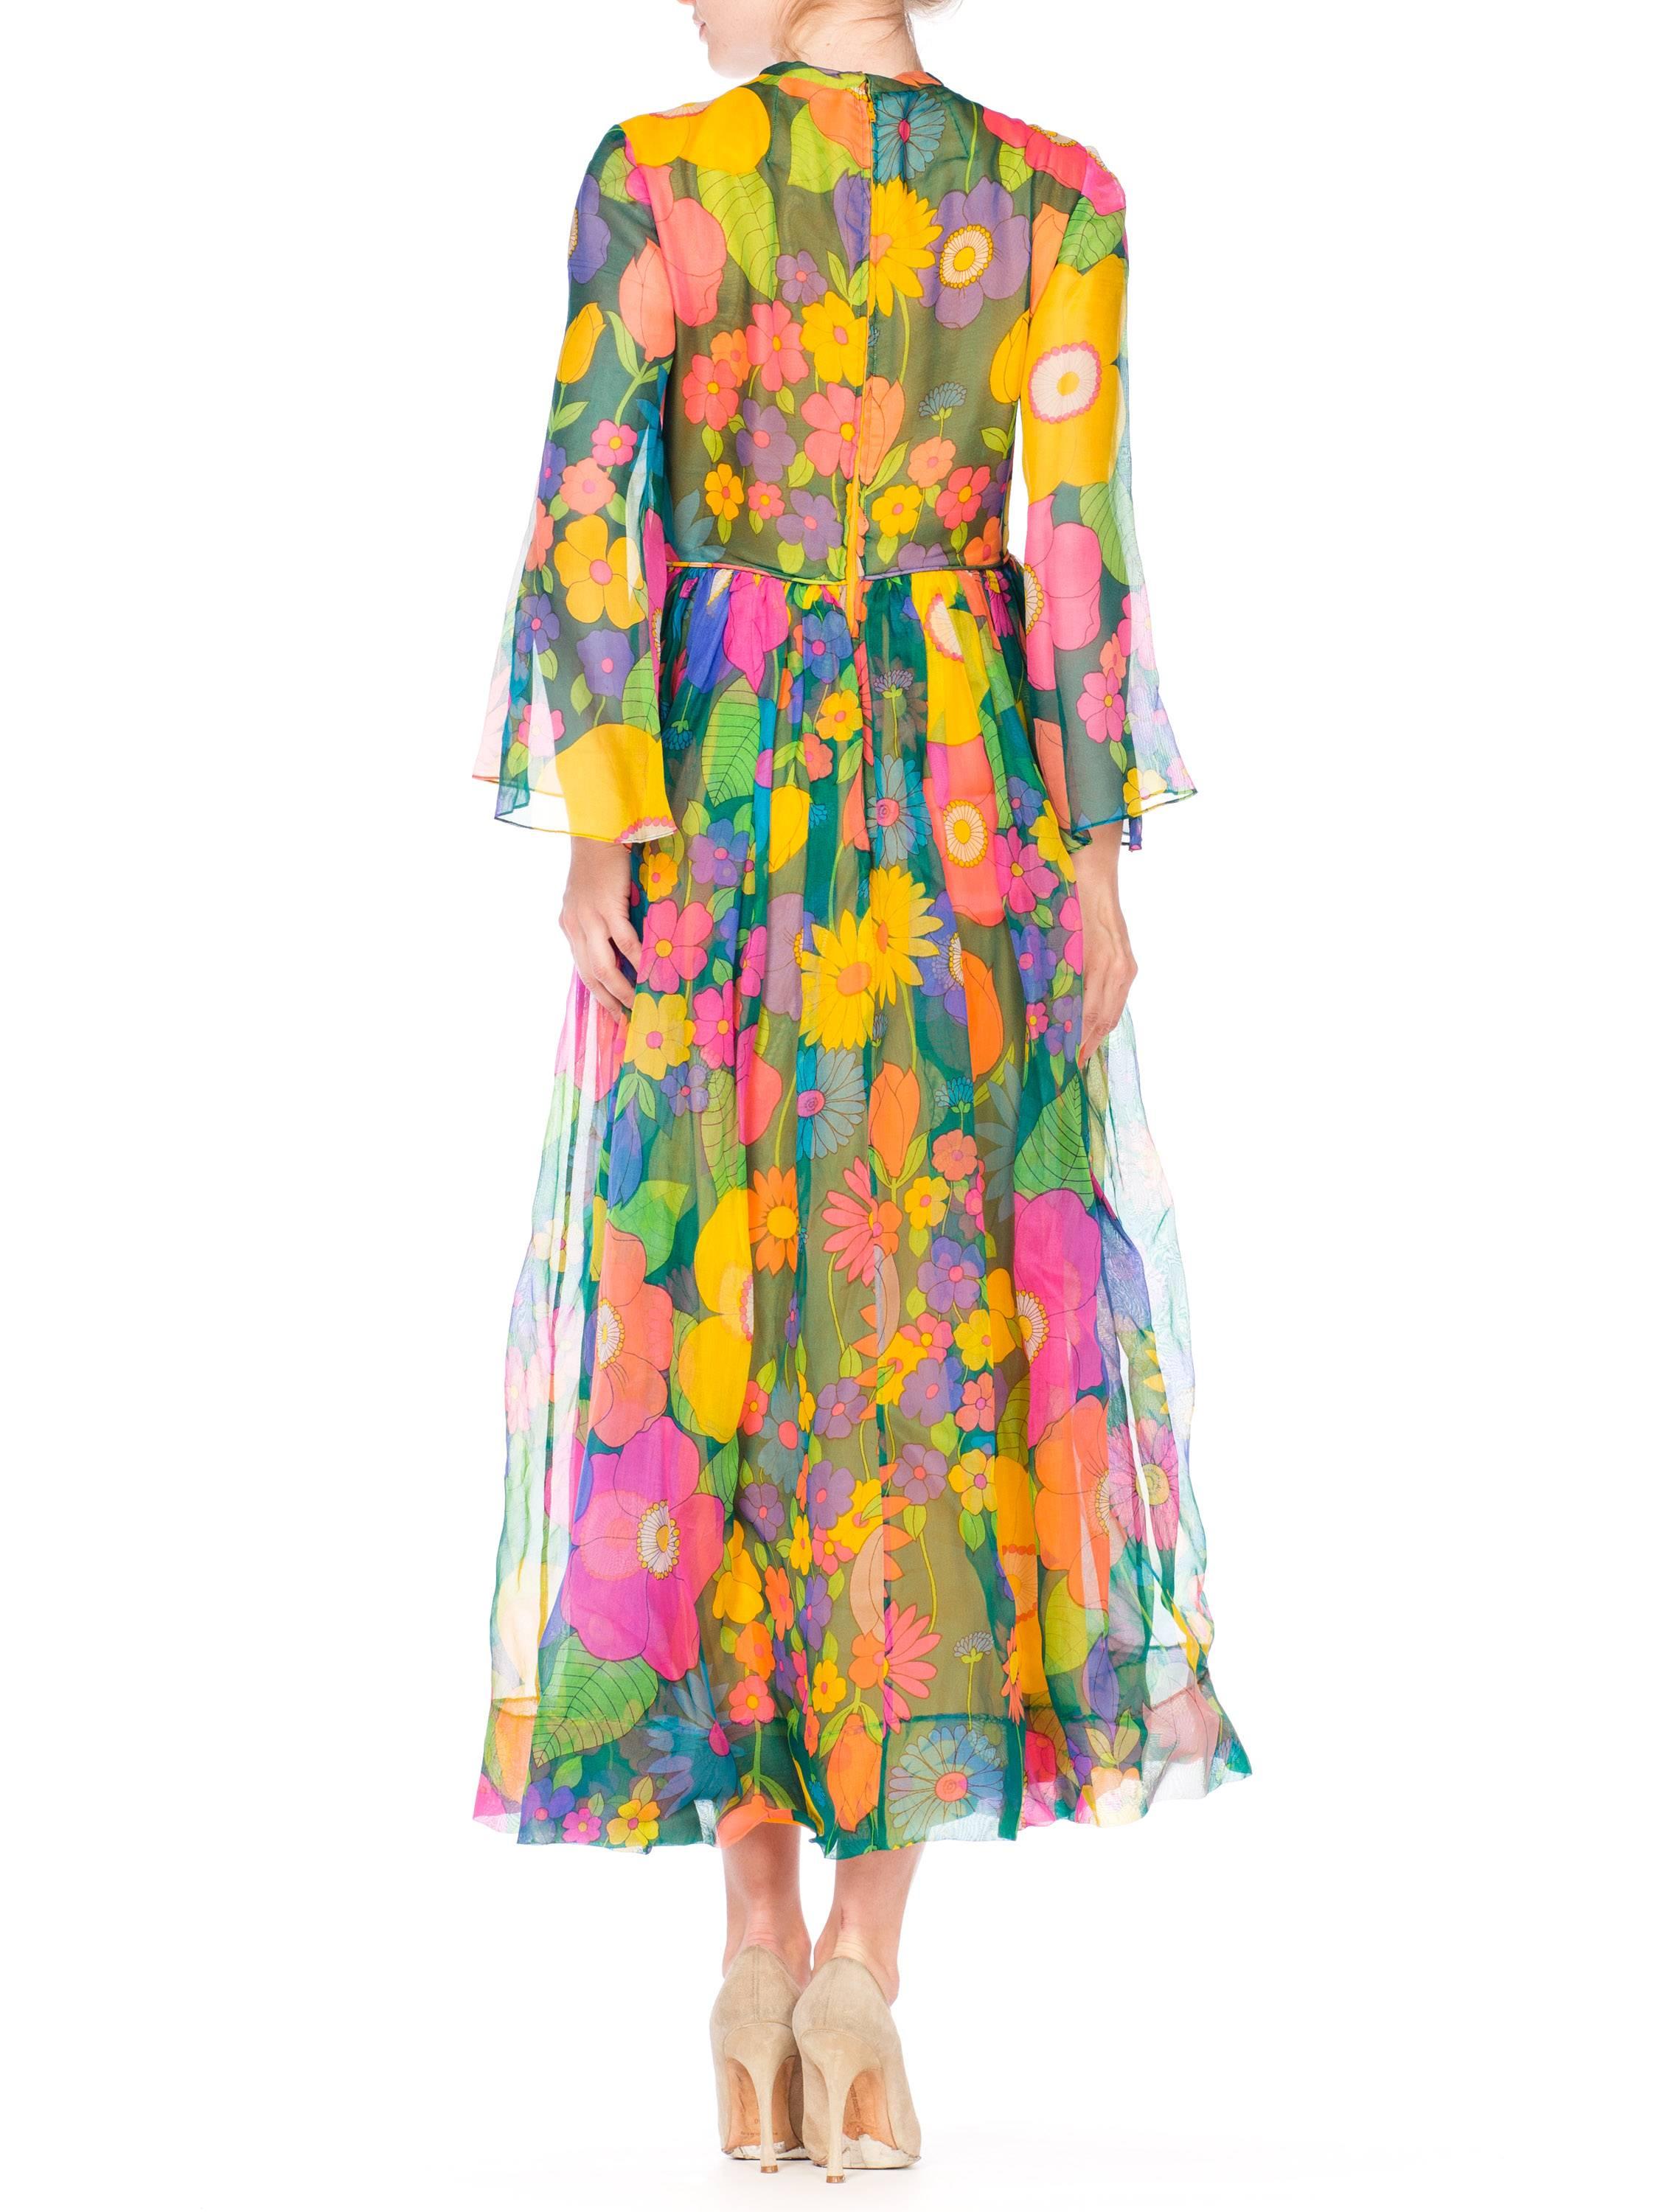 1960s 1970s Floral Print Dress with Bell Sleeves 5